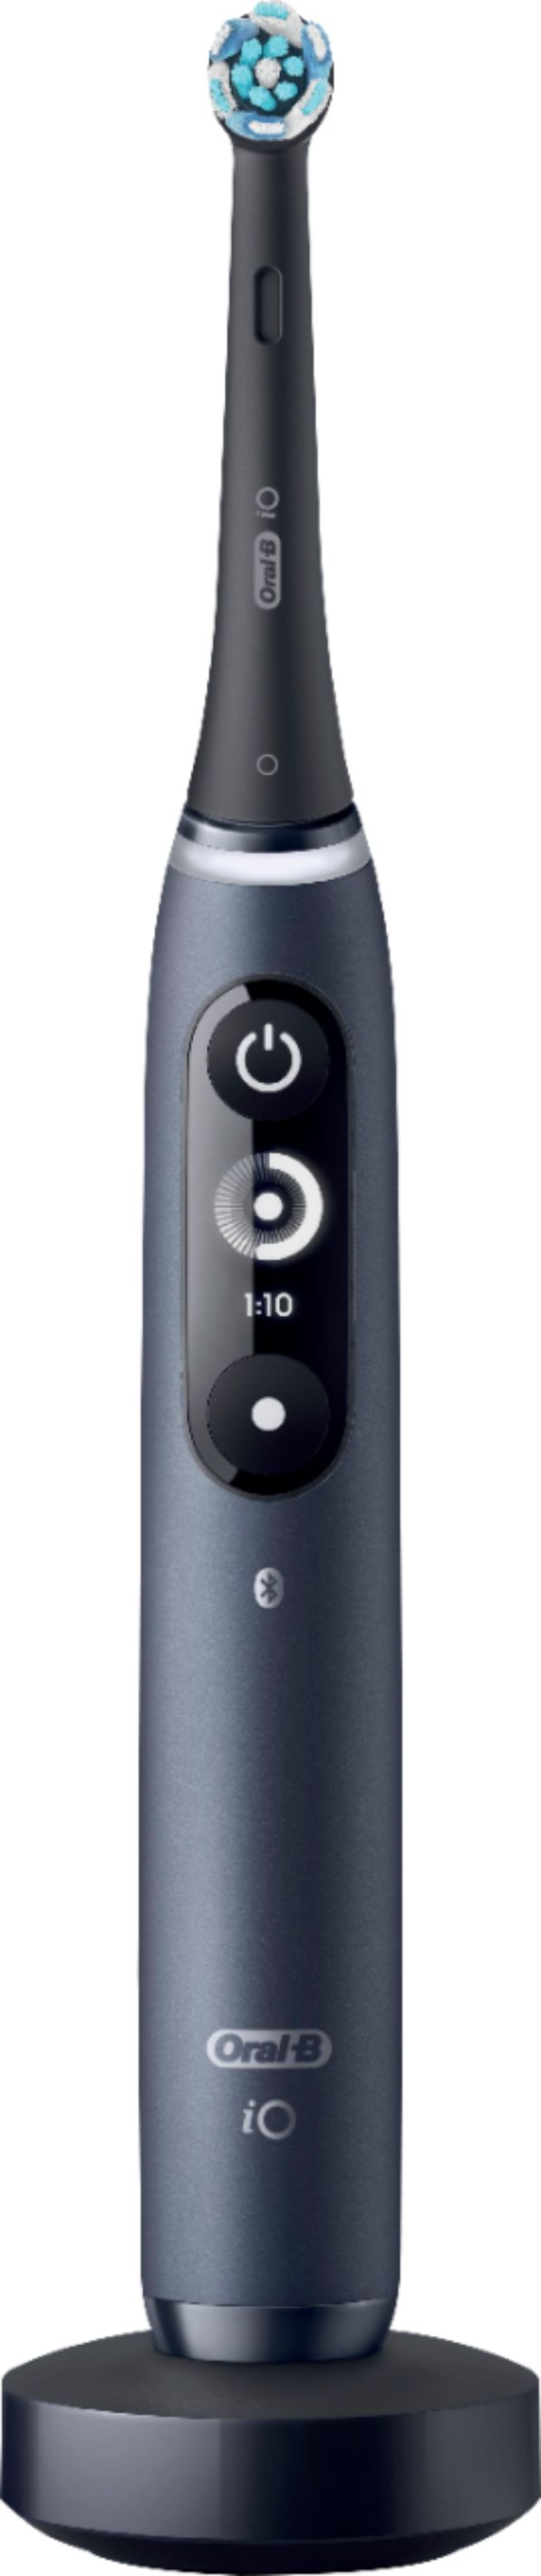 Left View: Oral-B - iO Series 7 Connected Rechargeable Electric Toothbrush - Onyx Black